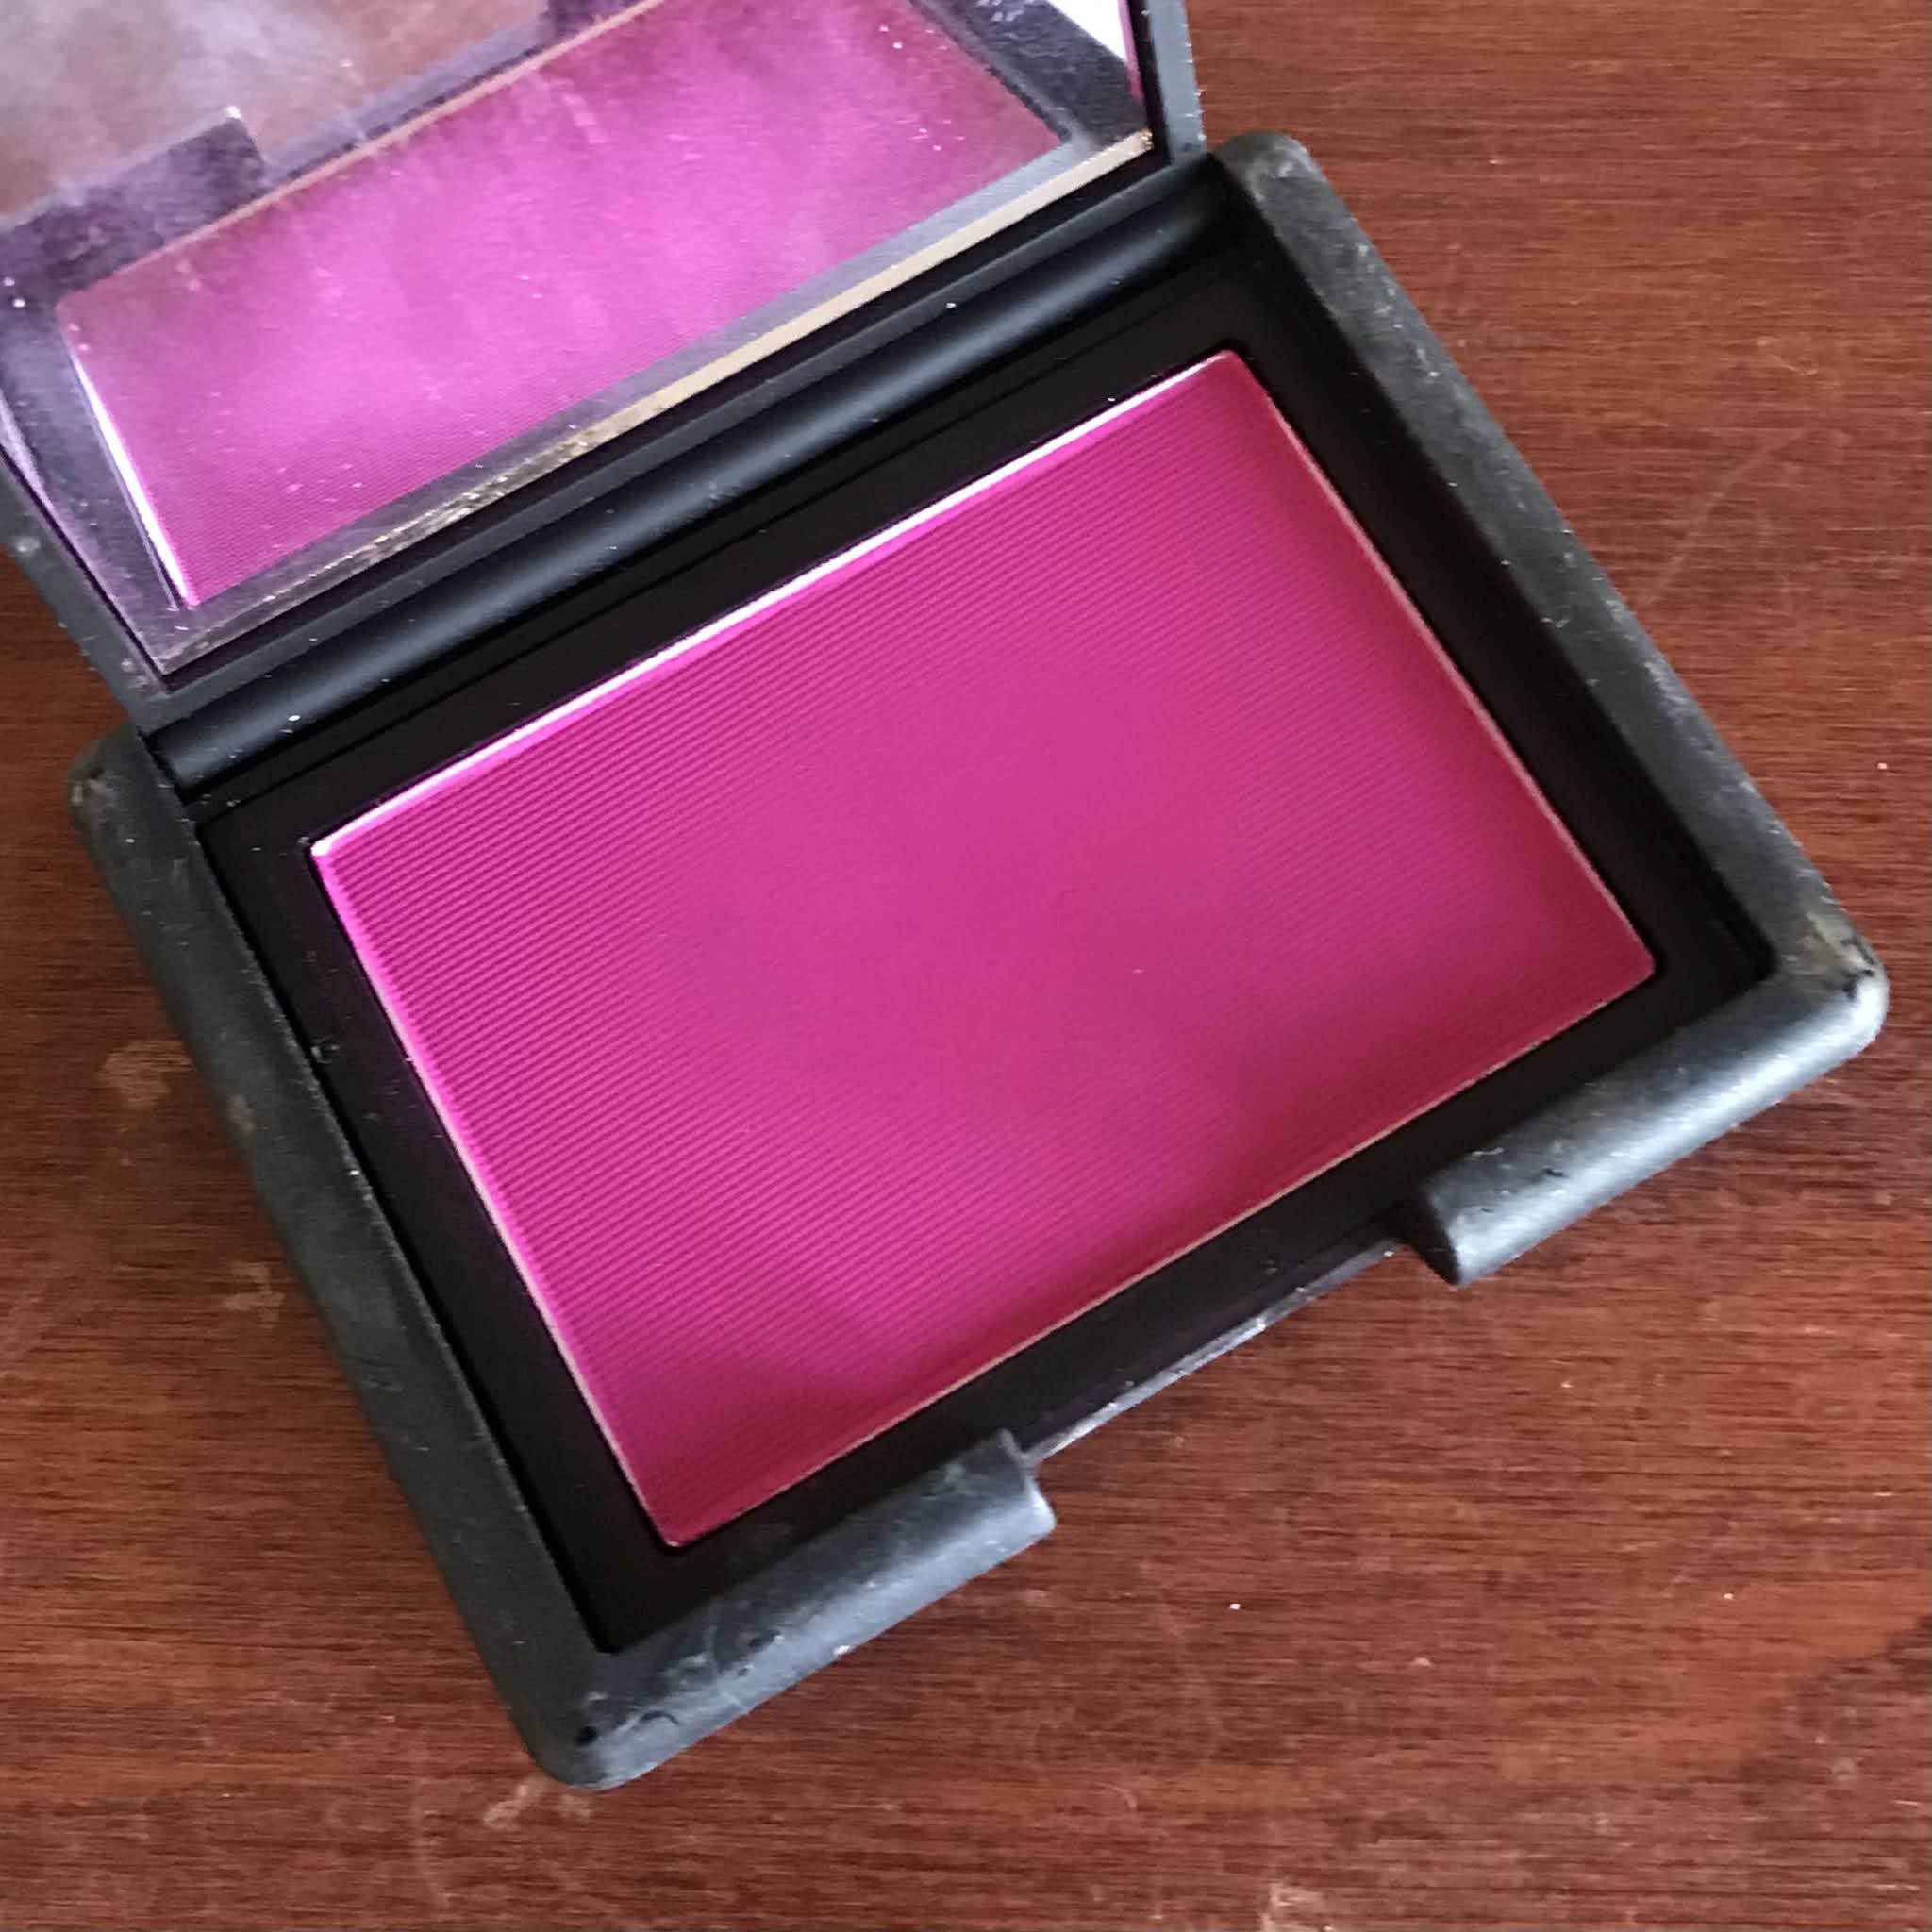 The Great Blush Inventory of 2021 – Auxiliary Beauty